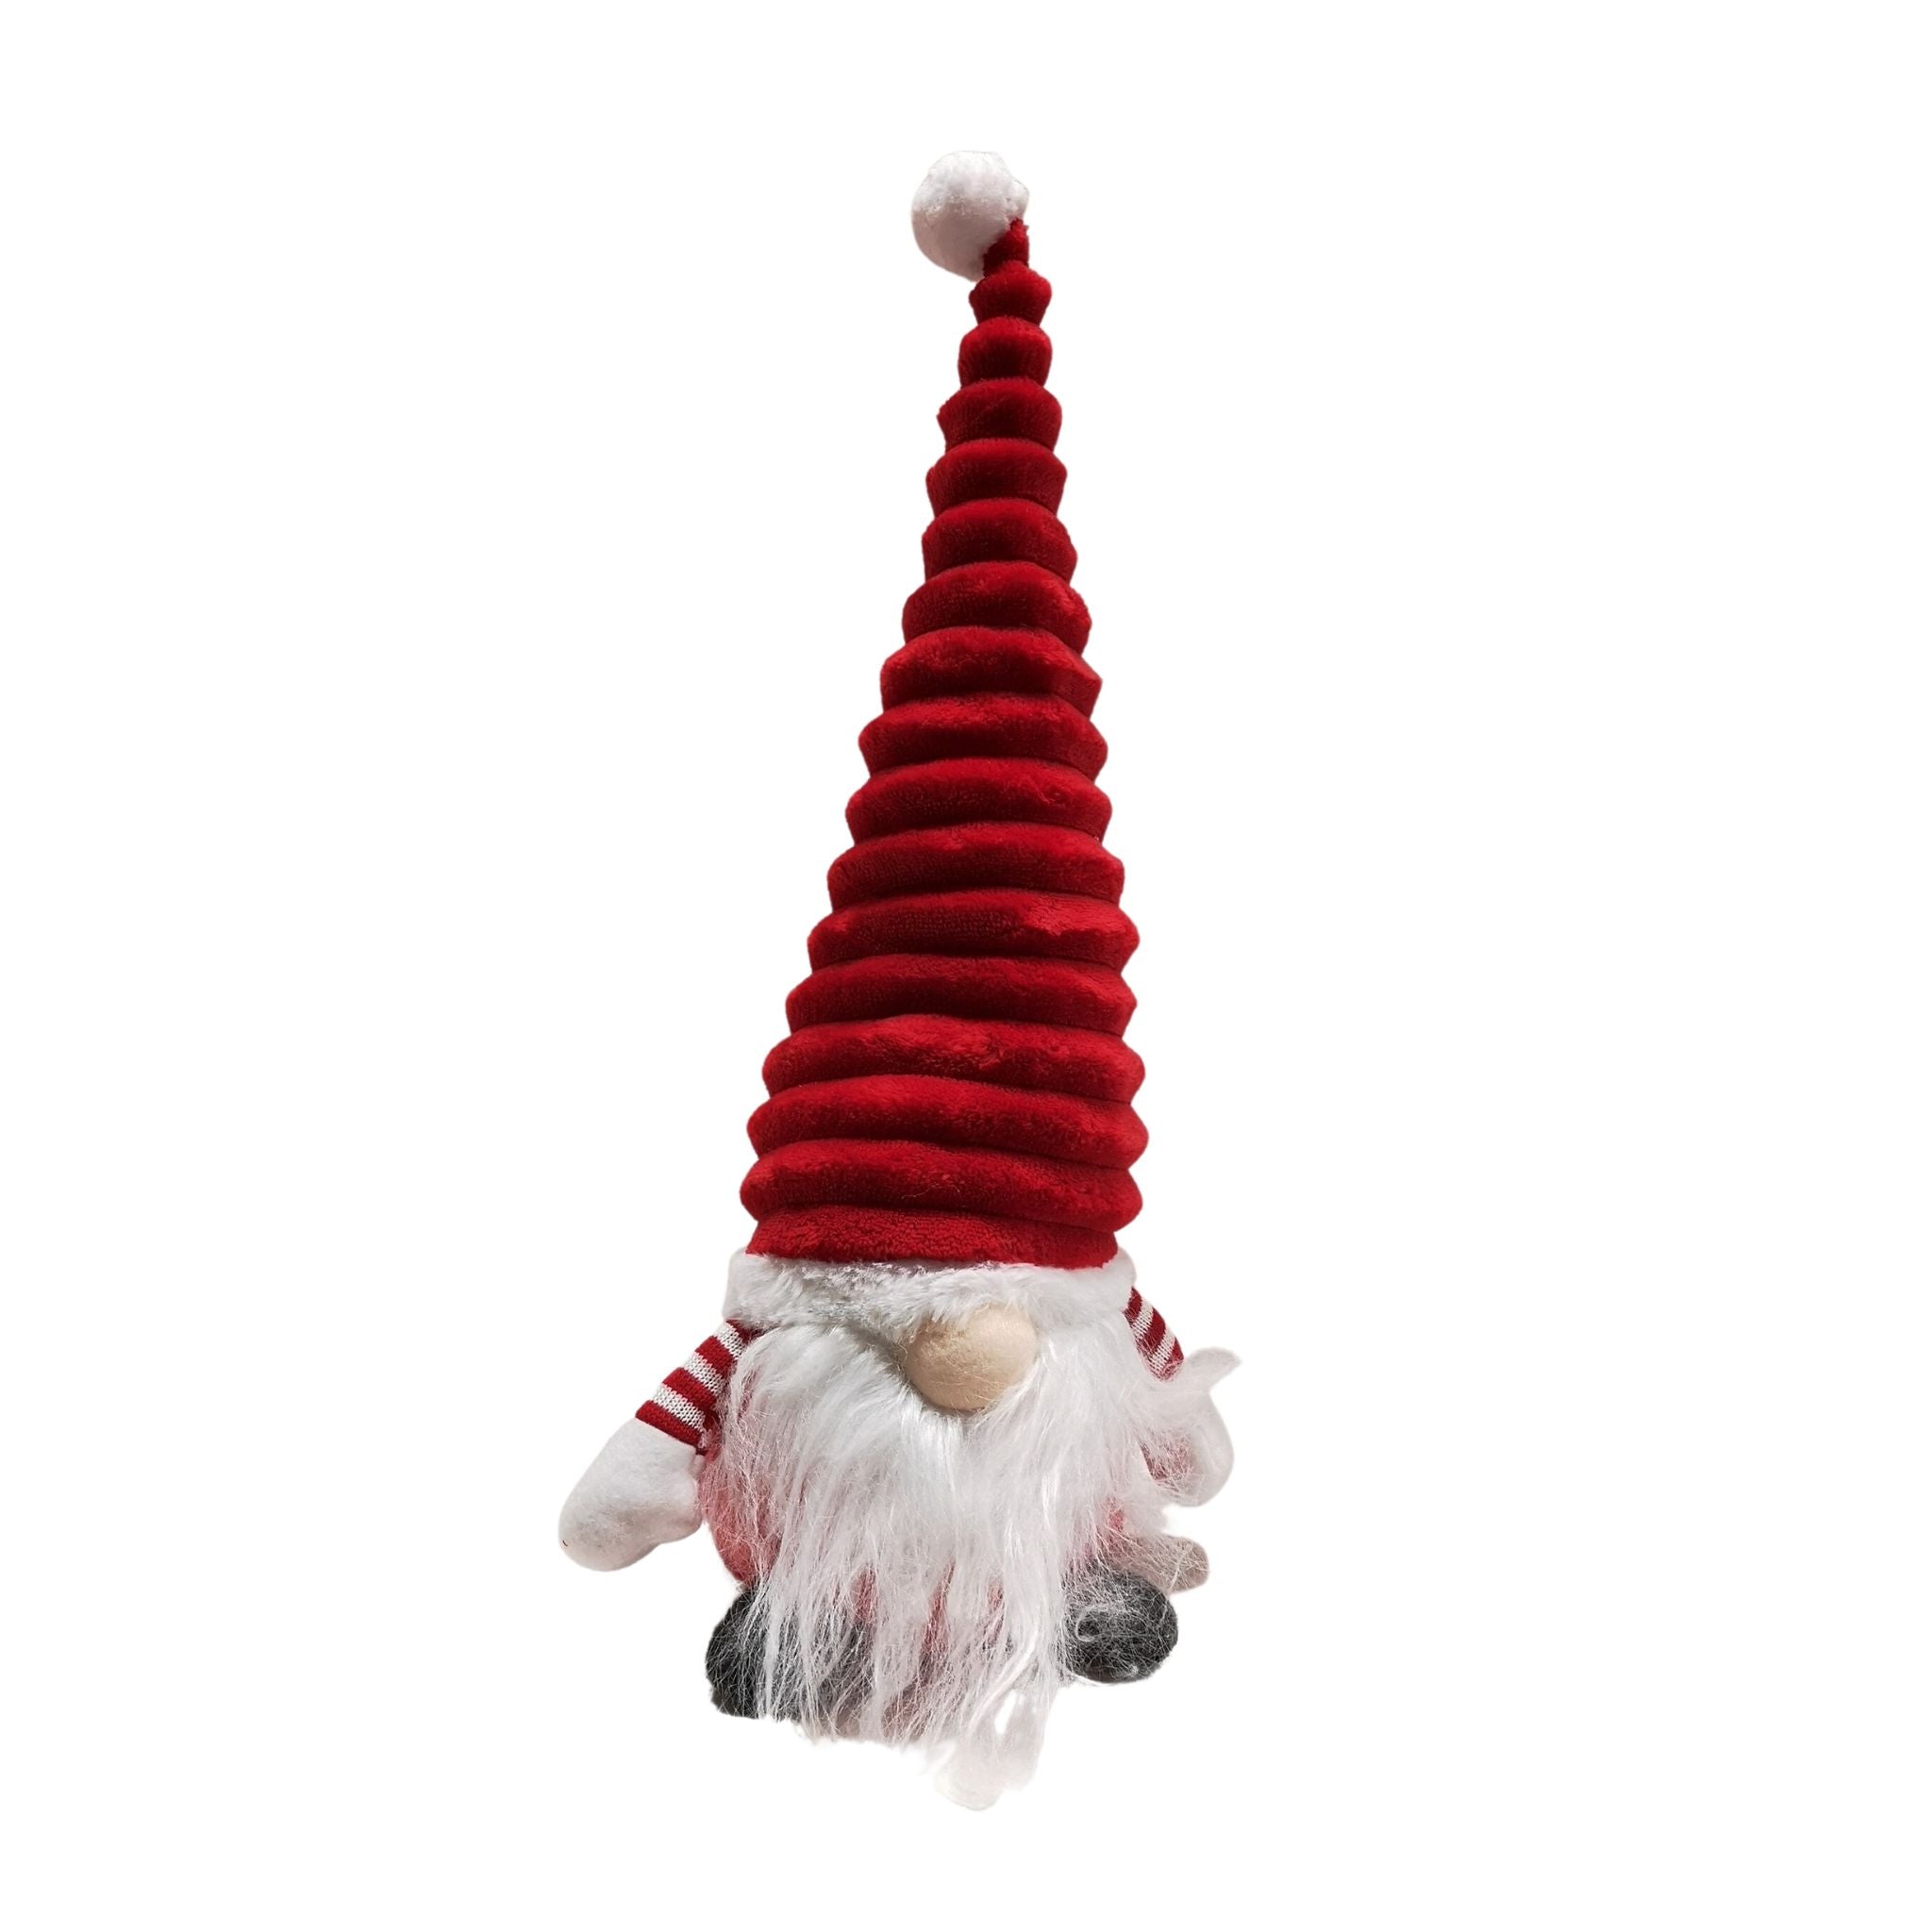 40cm Sitting Plush Christmas Gonk with Grooved Hat in Red